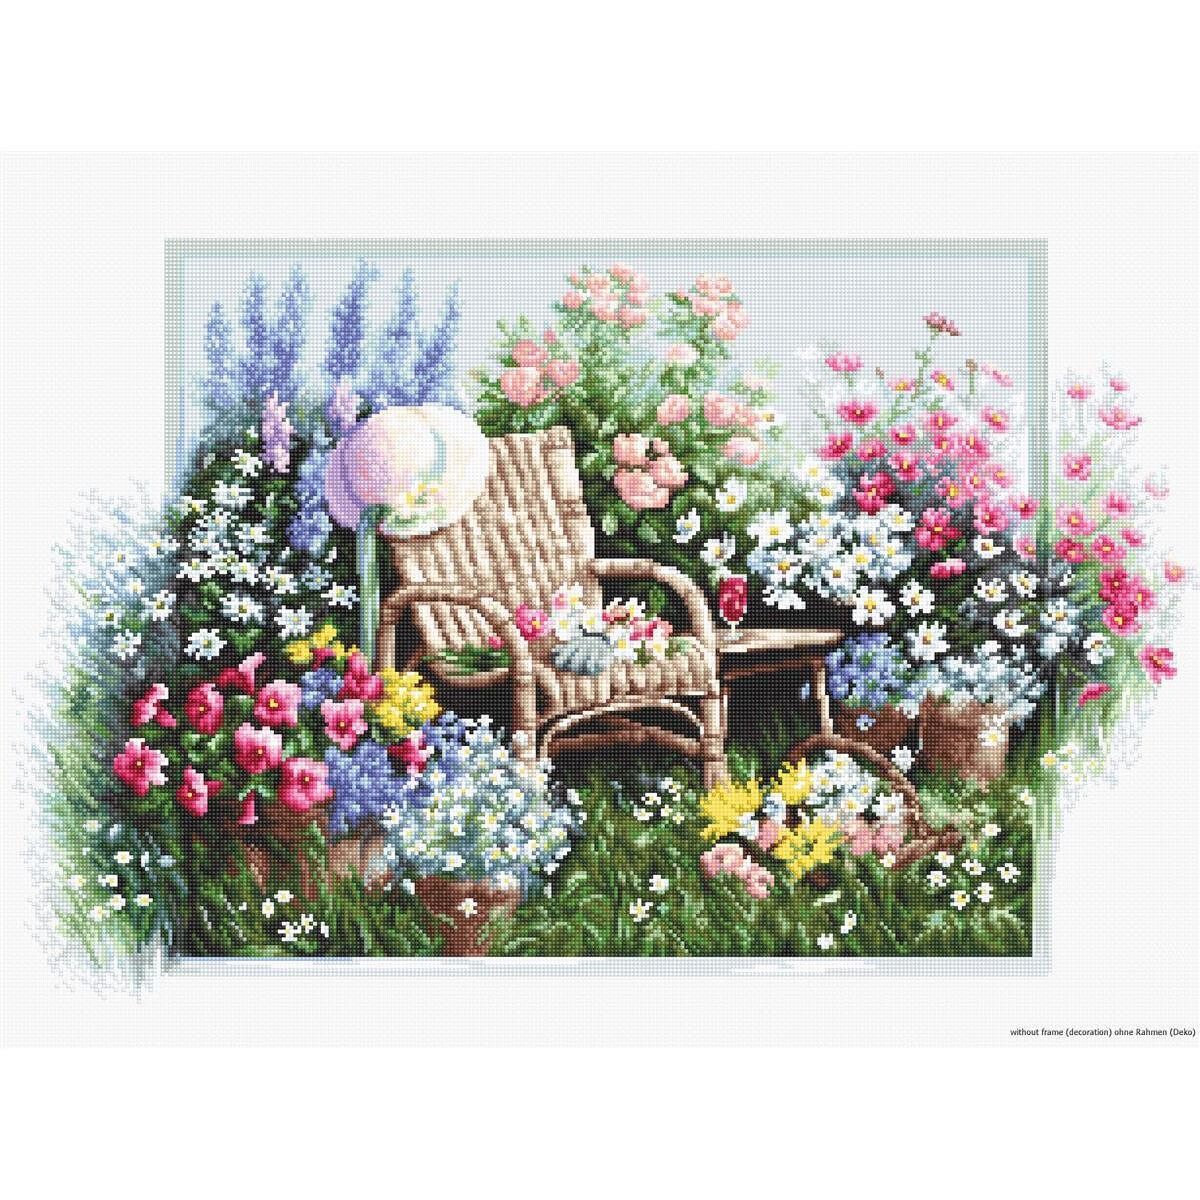 A tranquil garden scene with a wicker chair surrounded by...